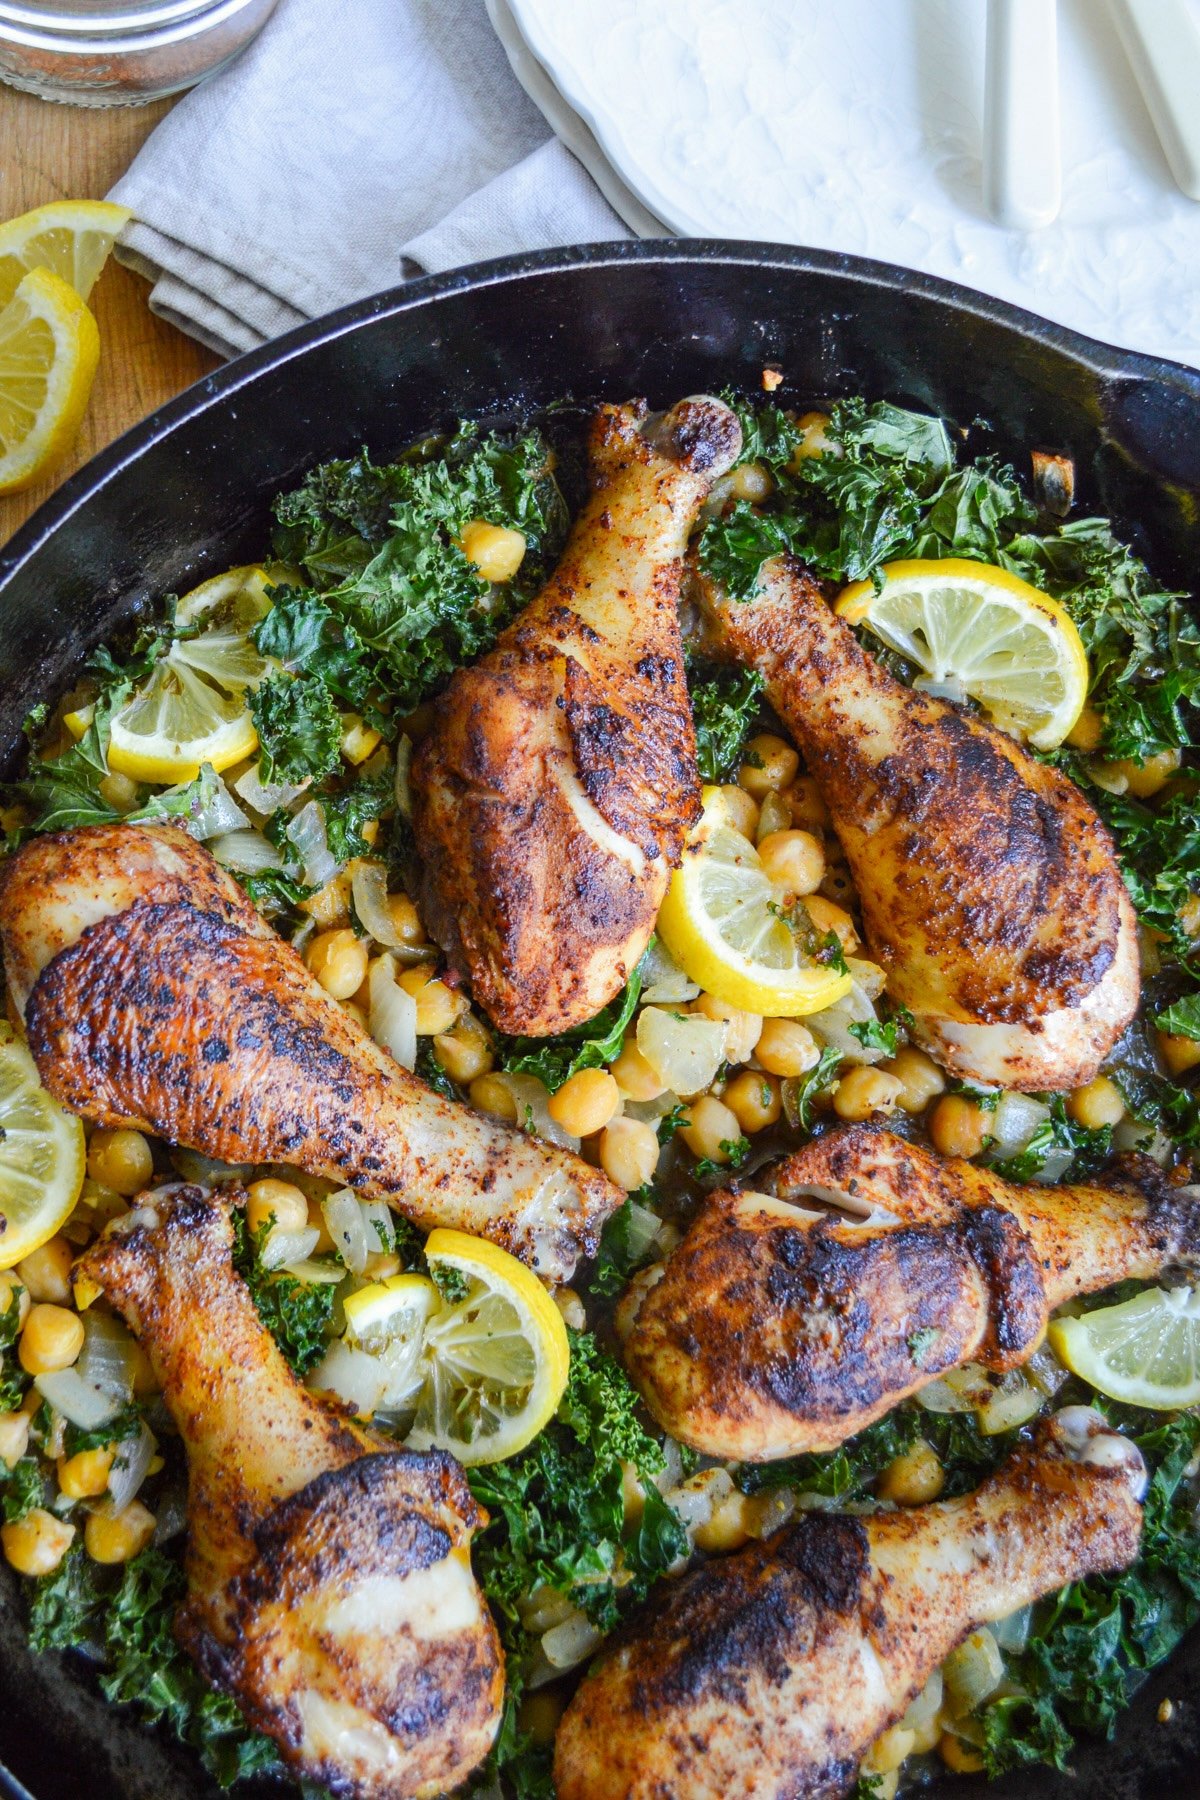 lemon chicken legs, beans and kale in cast iron skillet